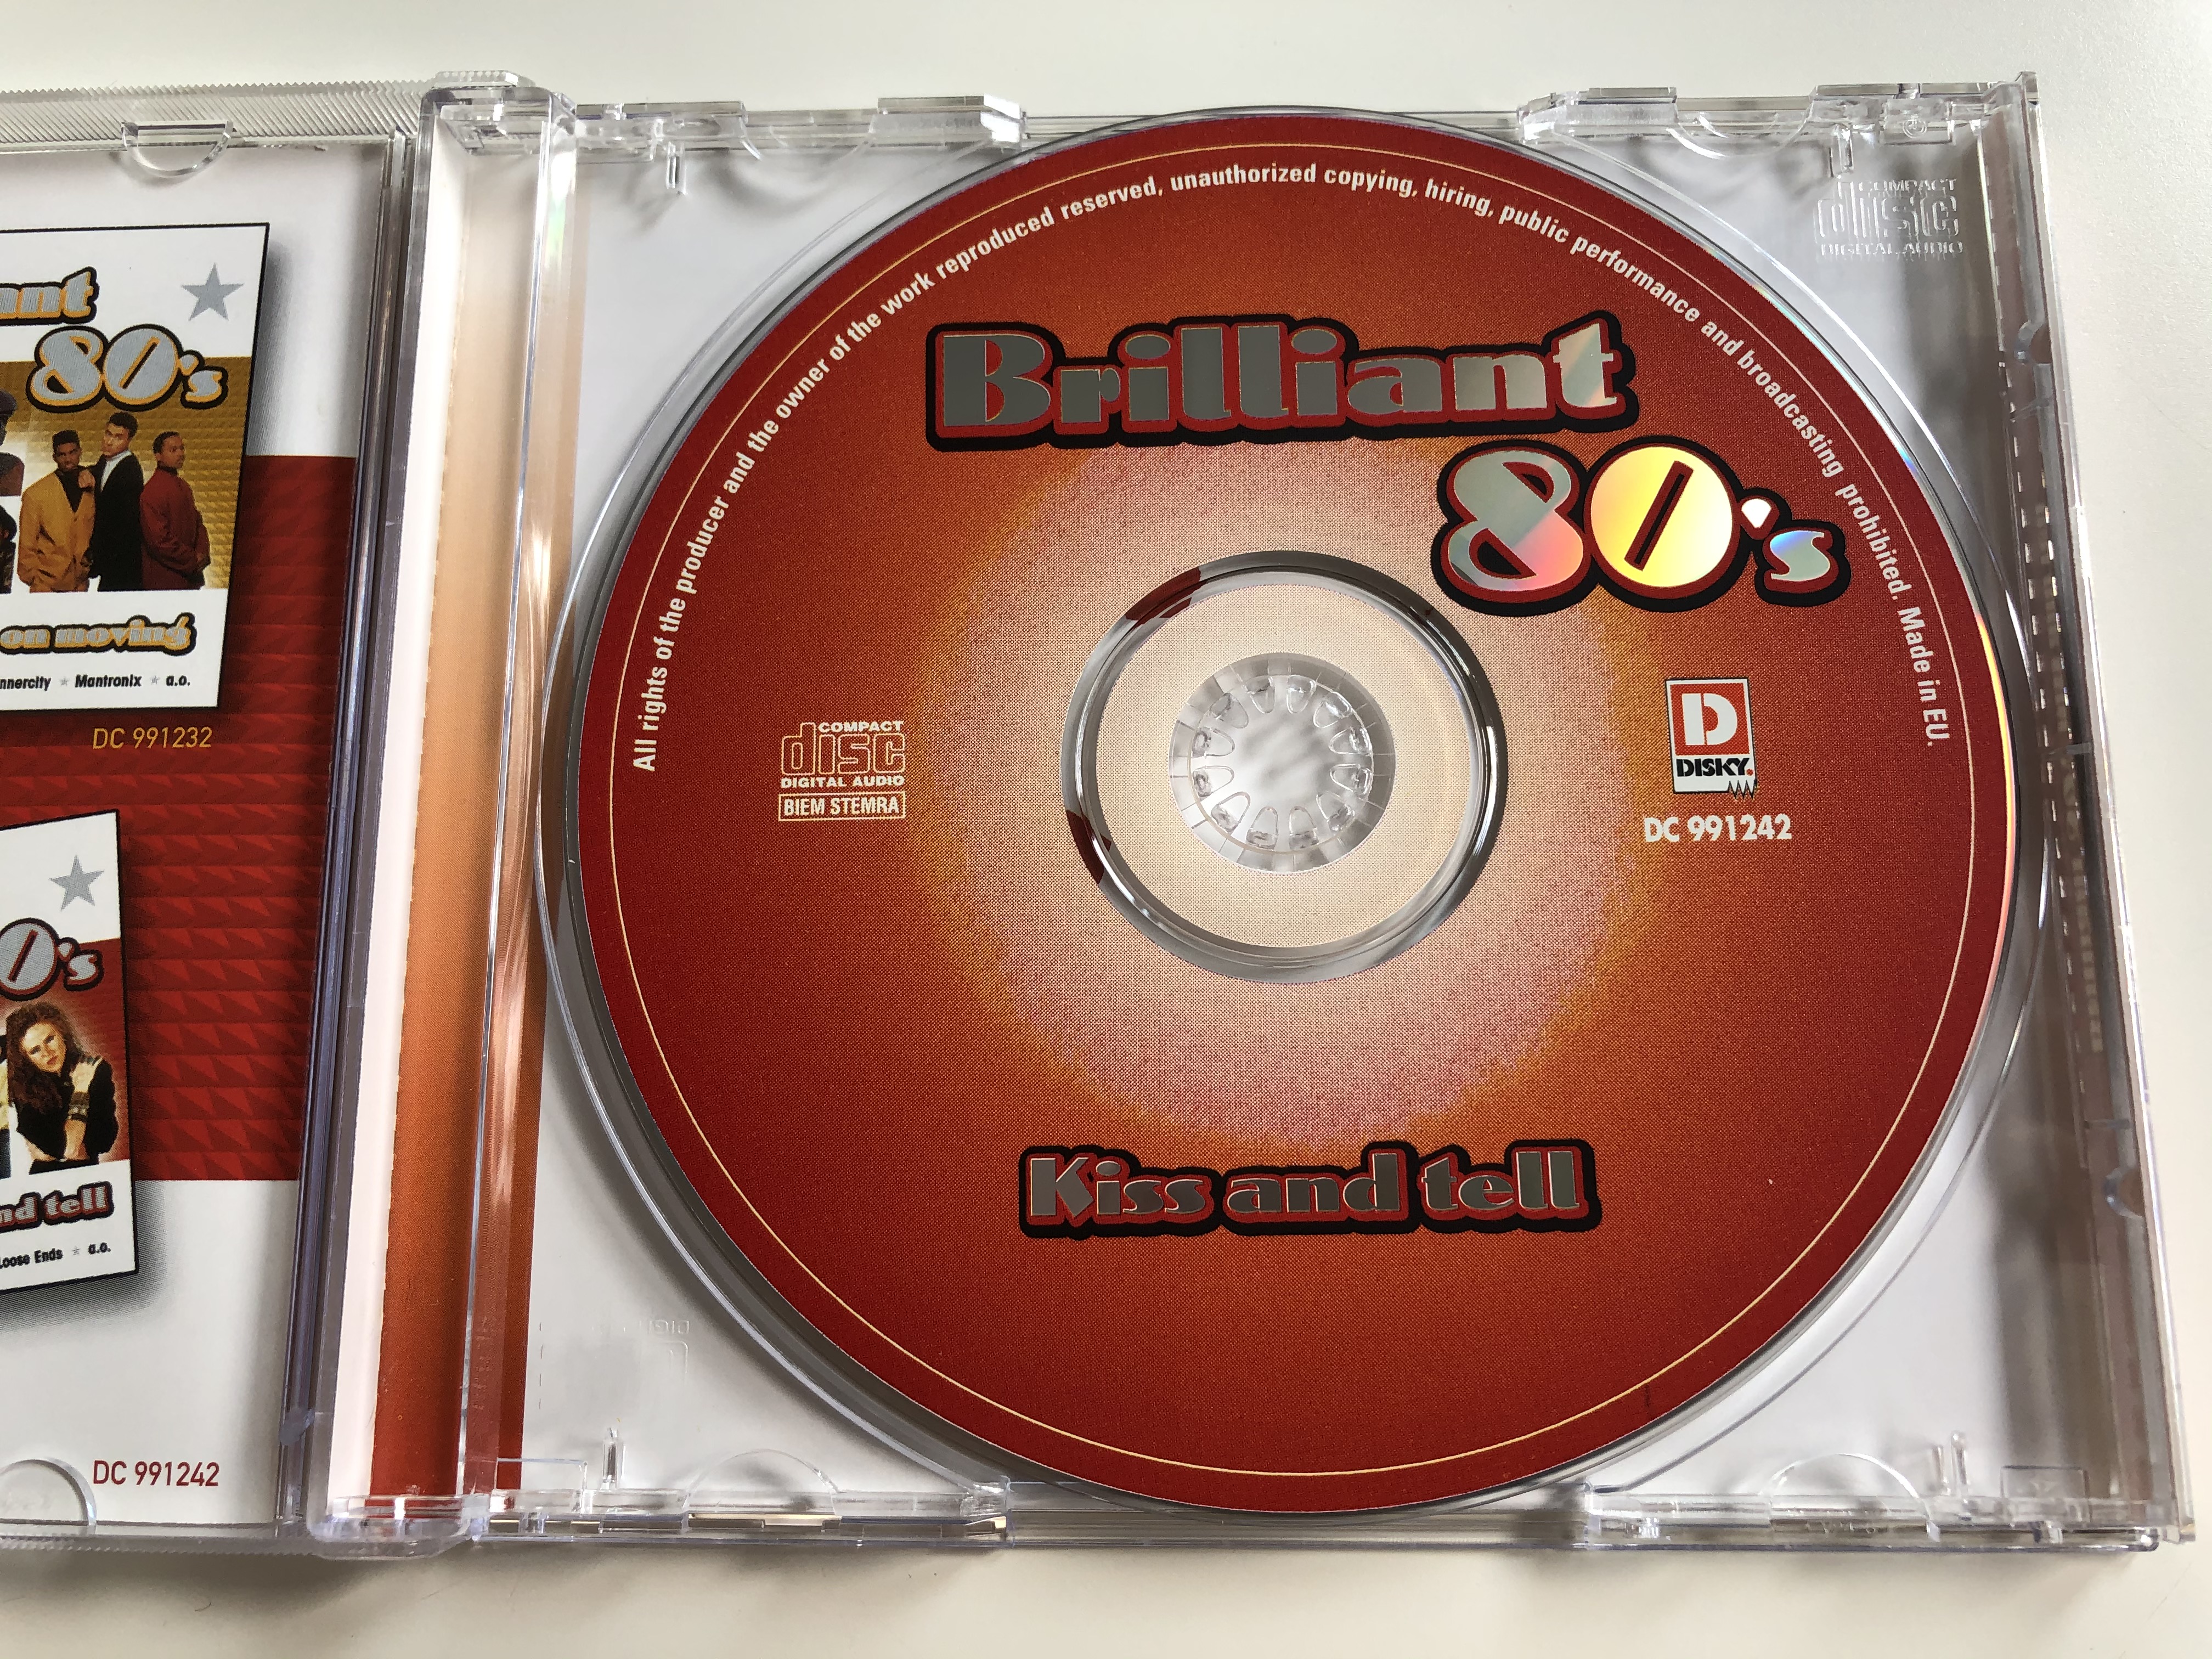 brilliant-80-s-kiss-and-tell-brian-ferry-maxi-priest-culture-club-loose-ends-a.o.-disky-audio-cd-2001-dc-991242-3-.jpg